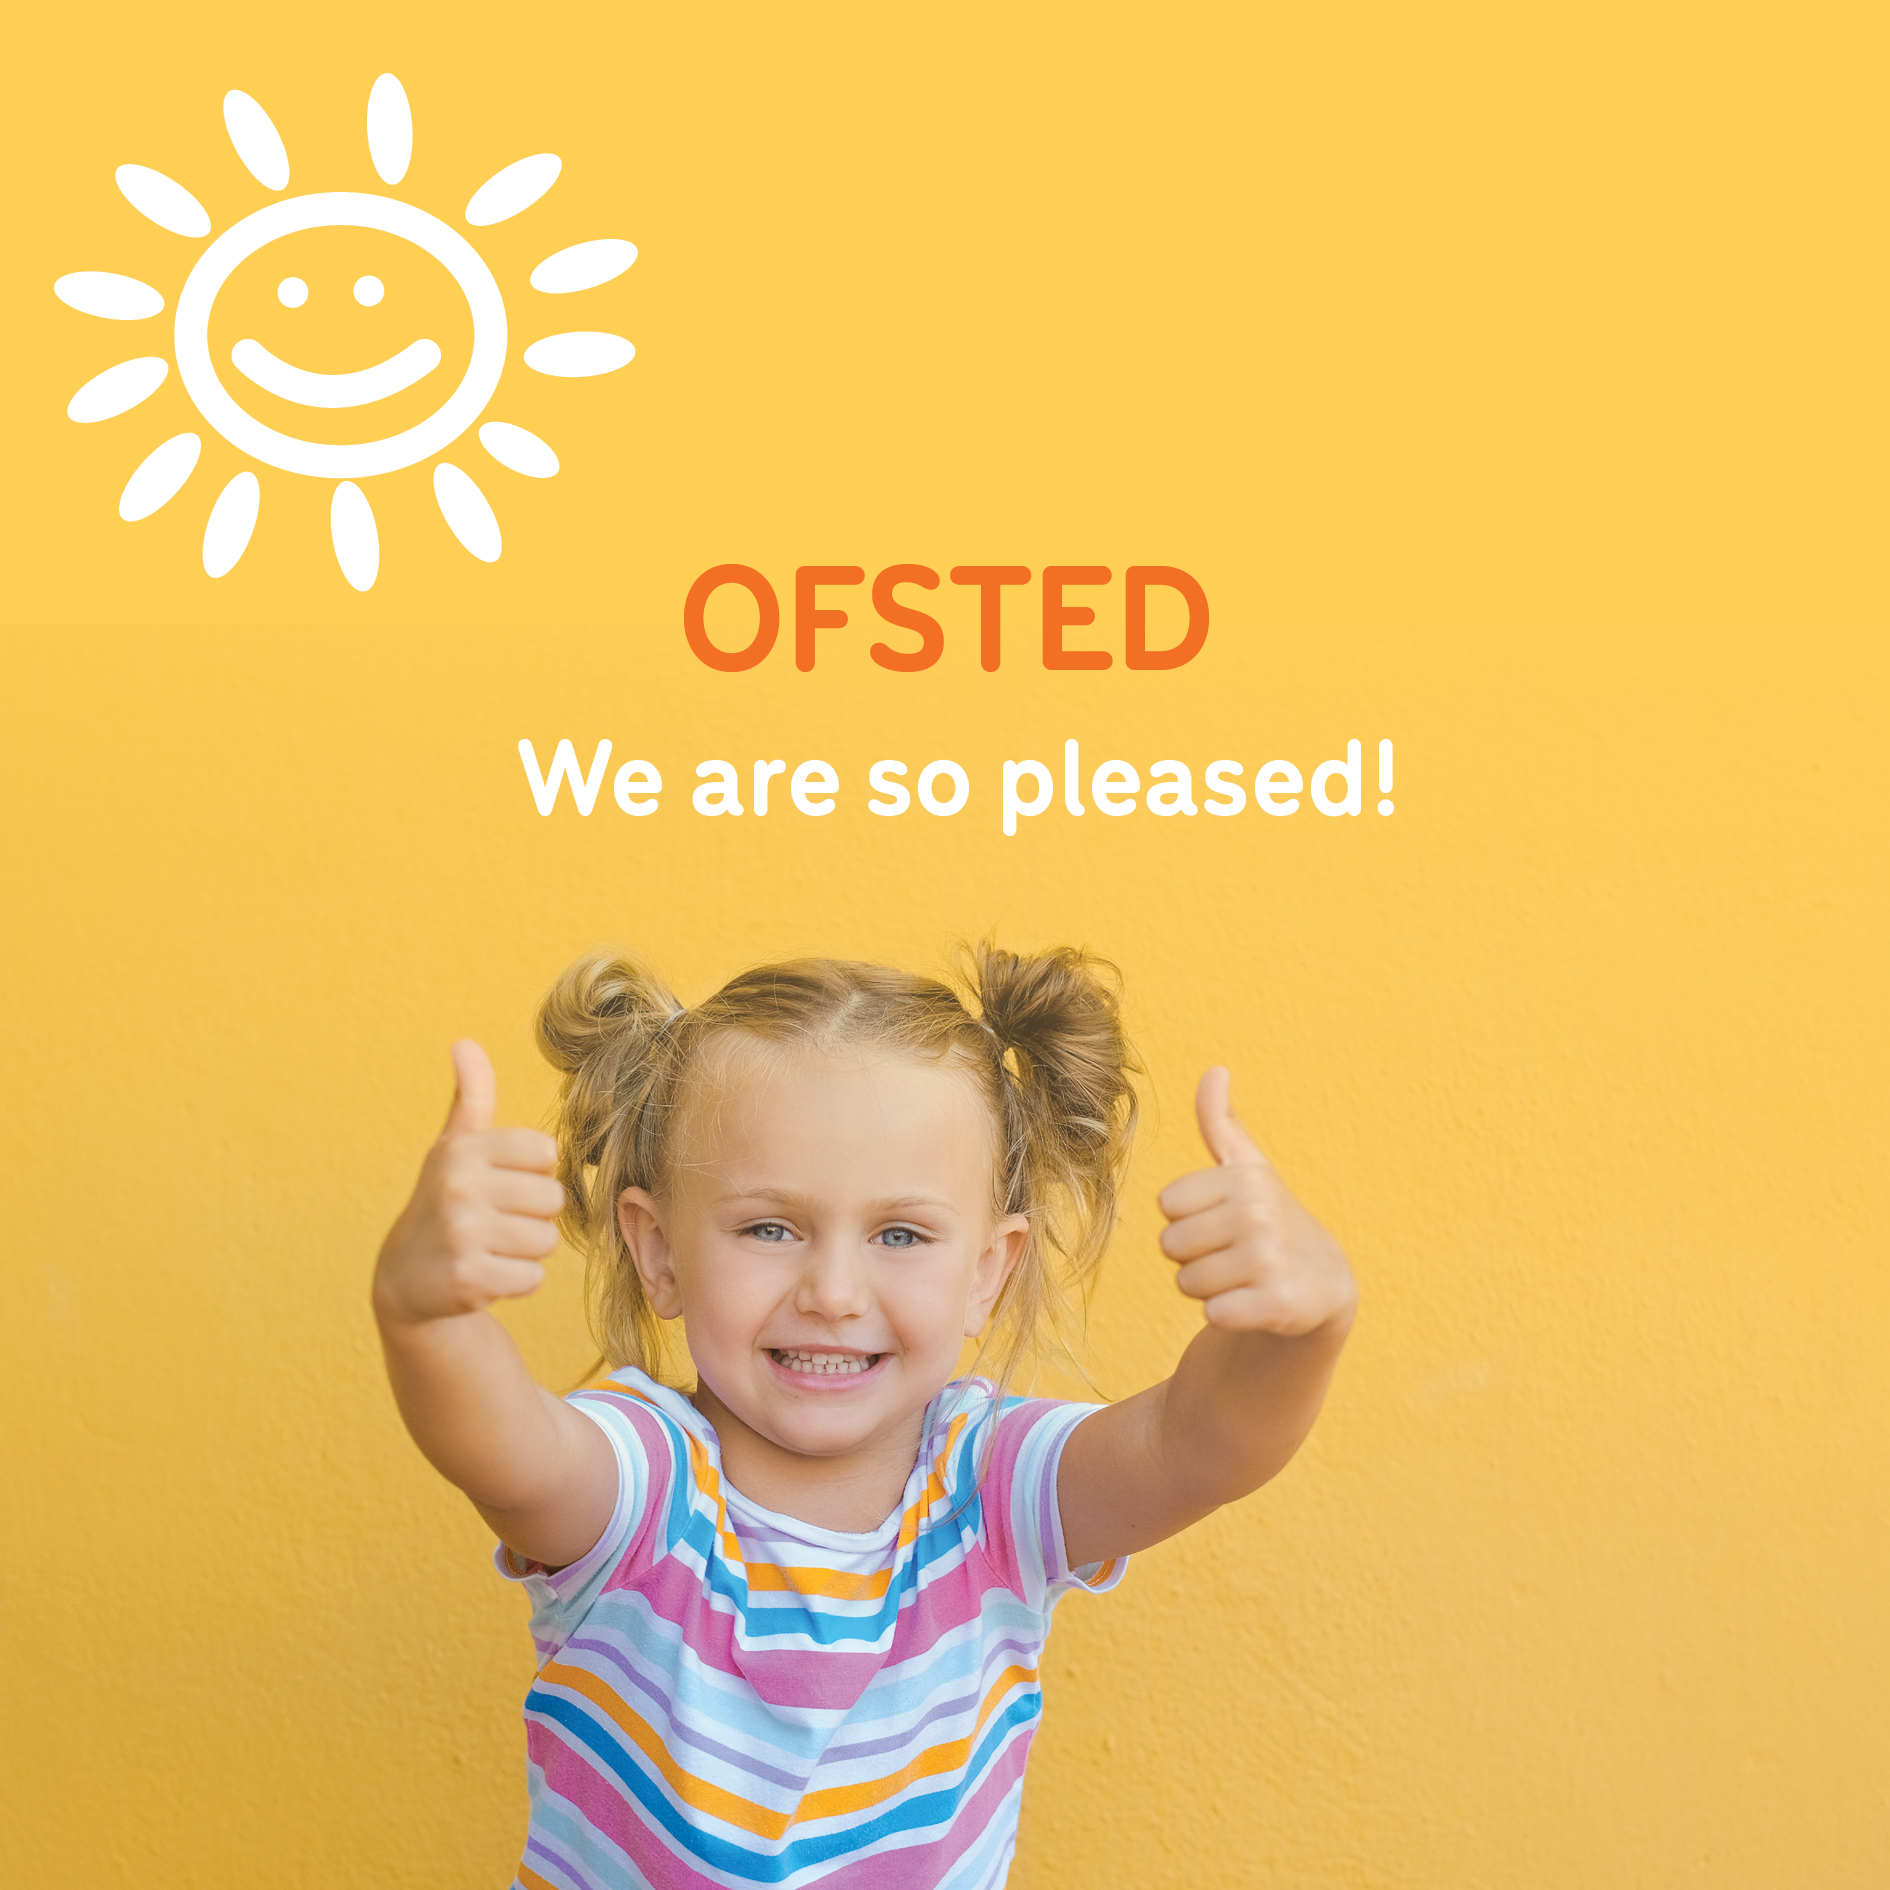 Hot off the Press - Good Ofsted news!